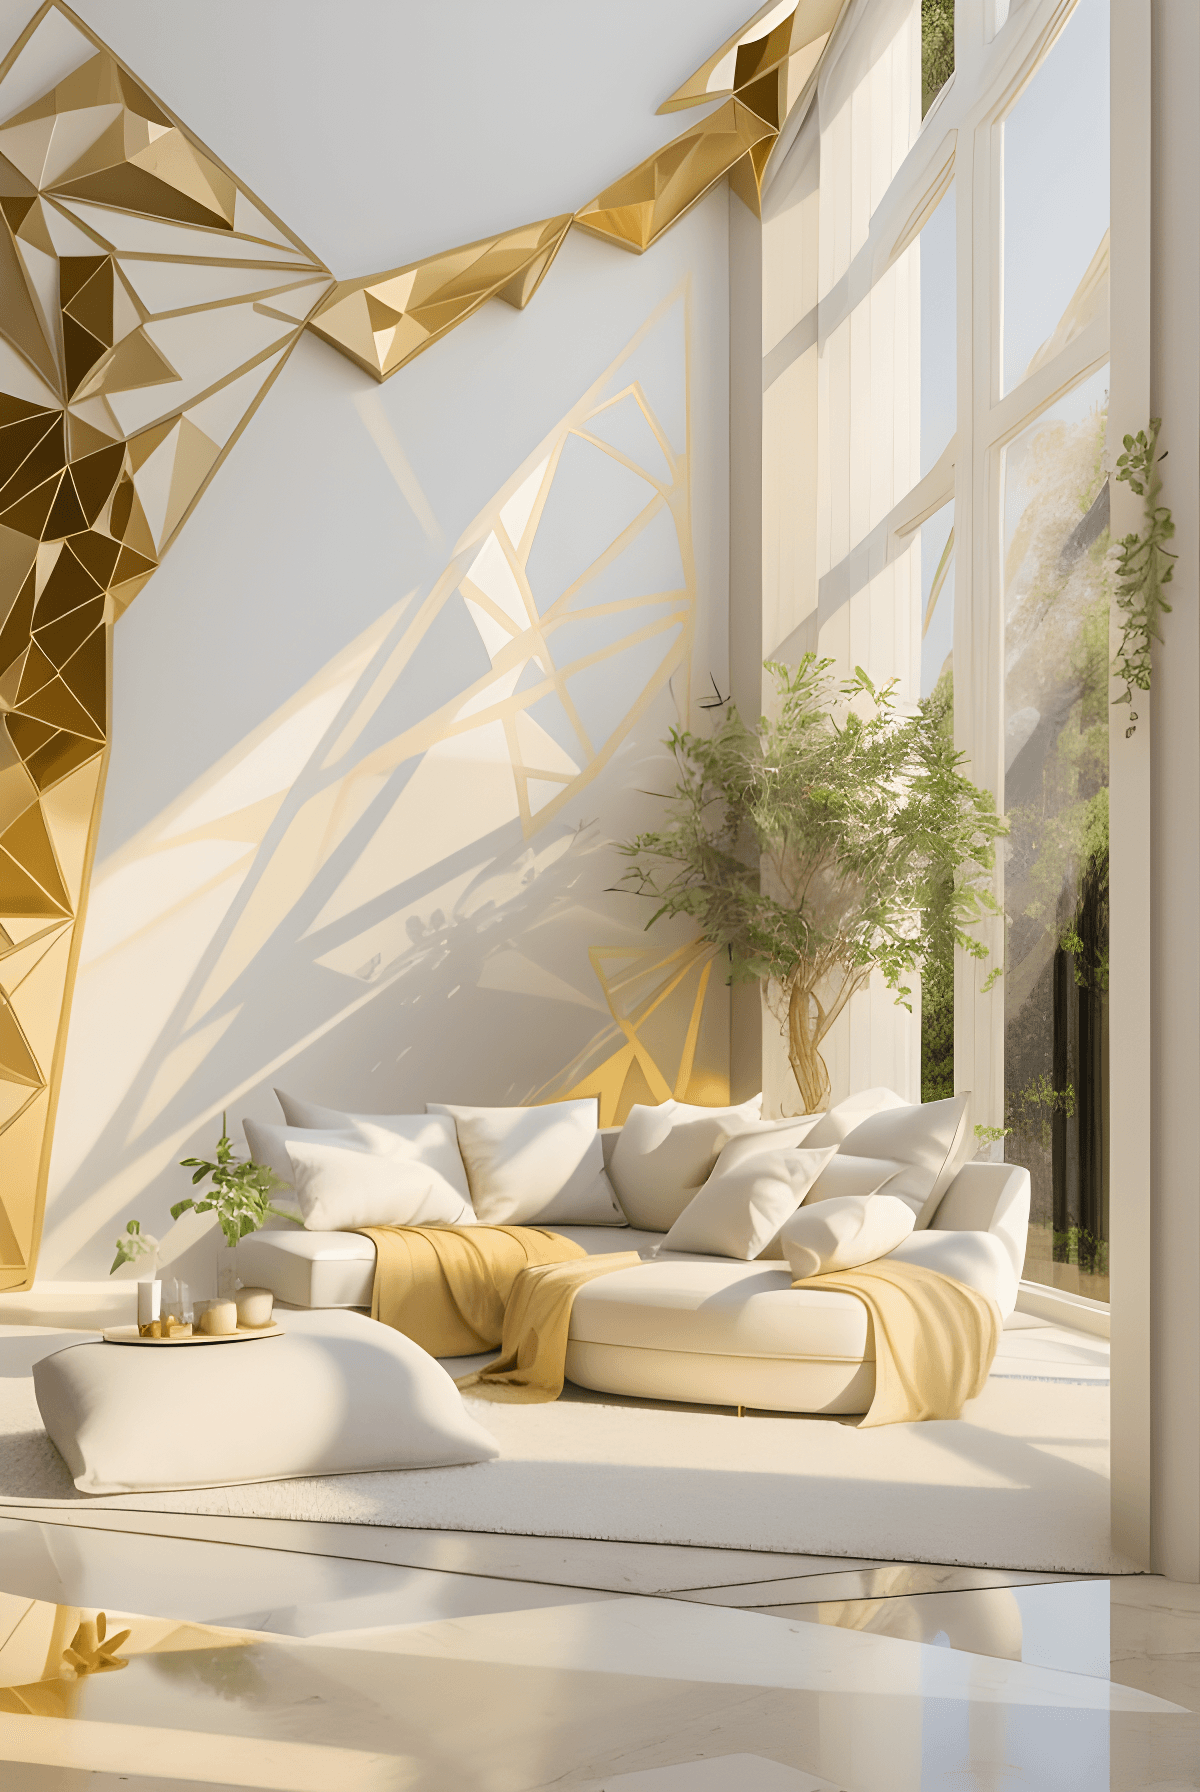 Davinte | AI Platform for Architects and Interior Designers - AI POWERED Rendering ENGINE